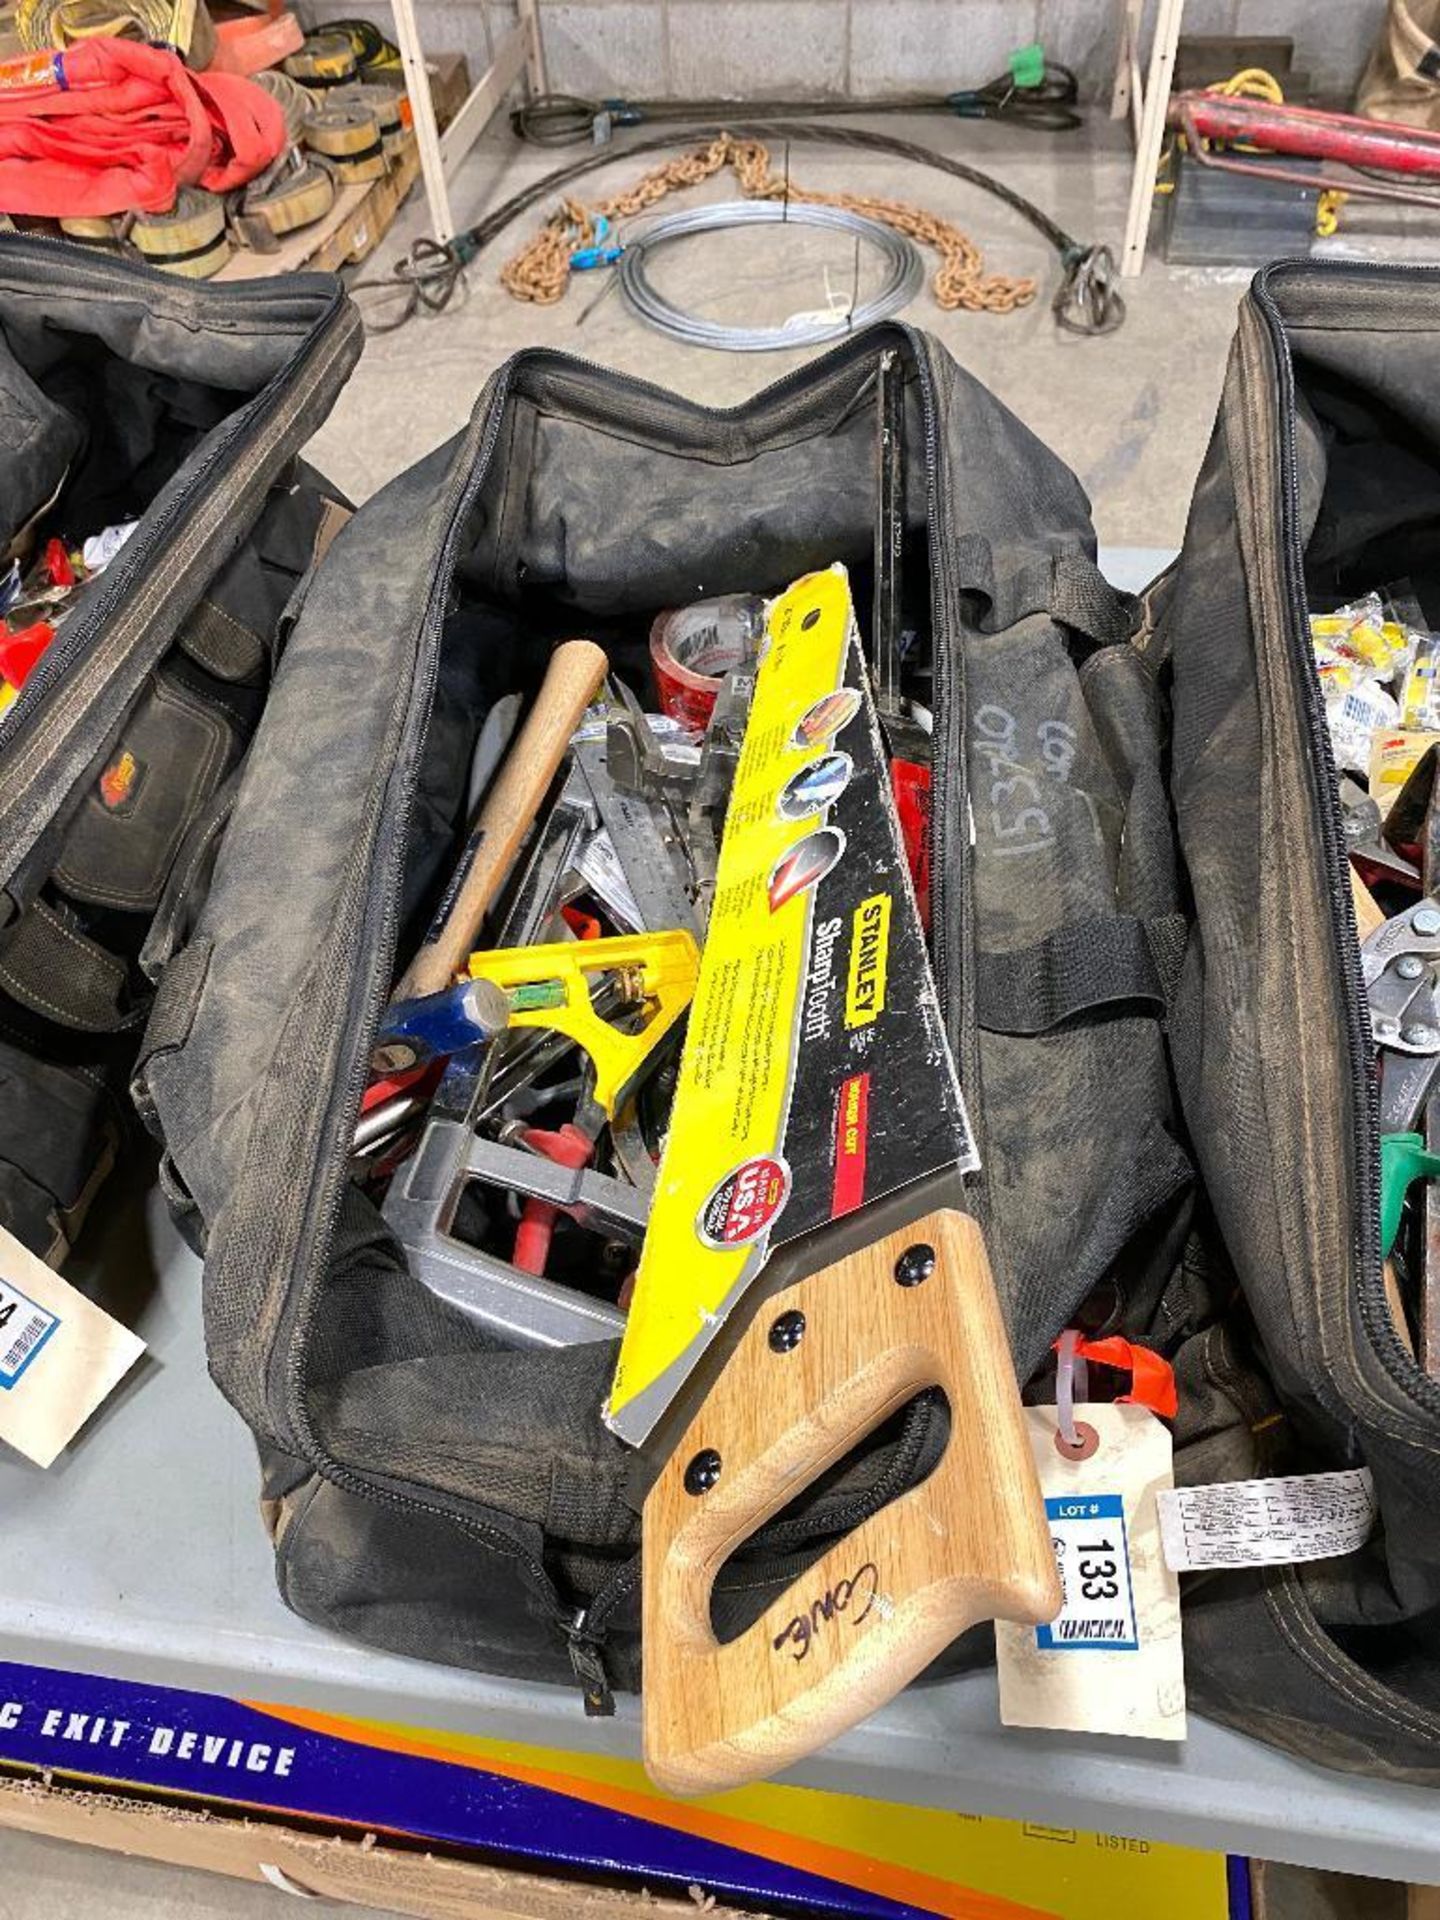 Lot of Asst. Hand Tools including Hammer, Saw, Snips, Vise Grips, Clamps, etc. - Image 2 of 6